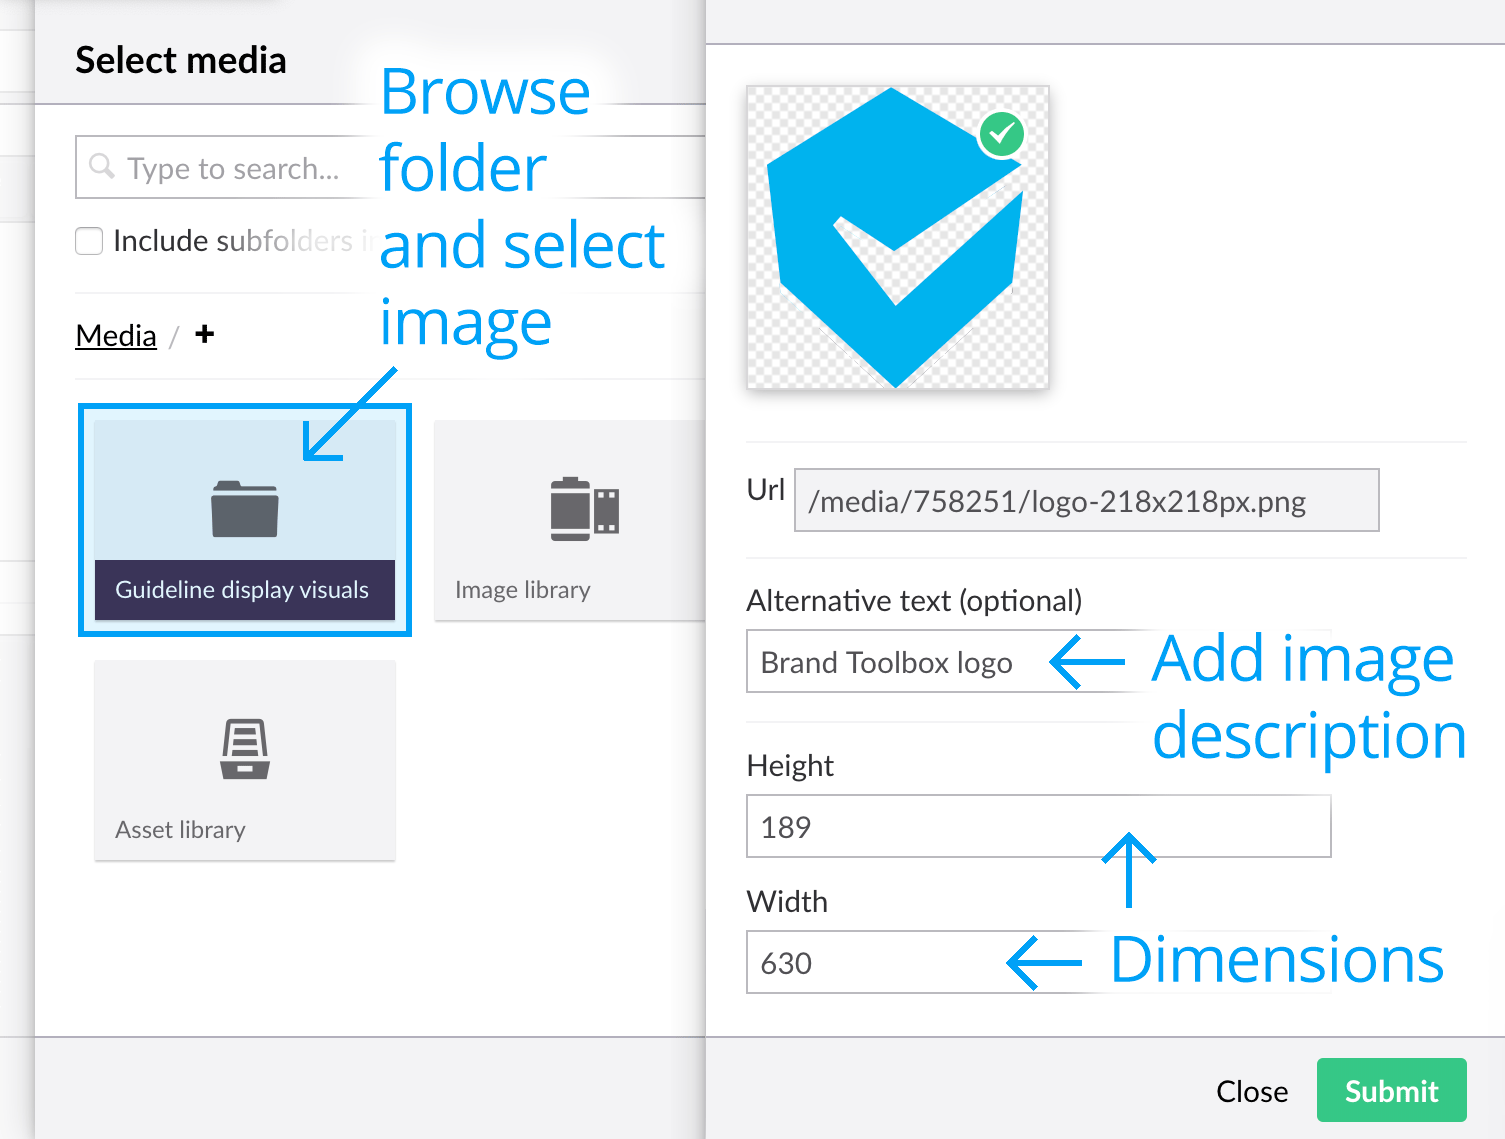 Insert image slide out panel with dimensions